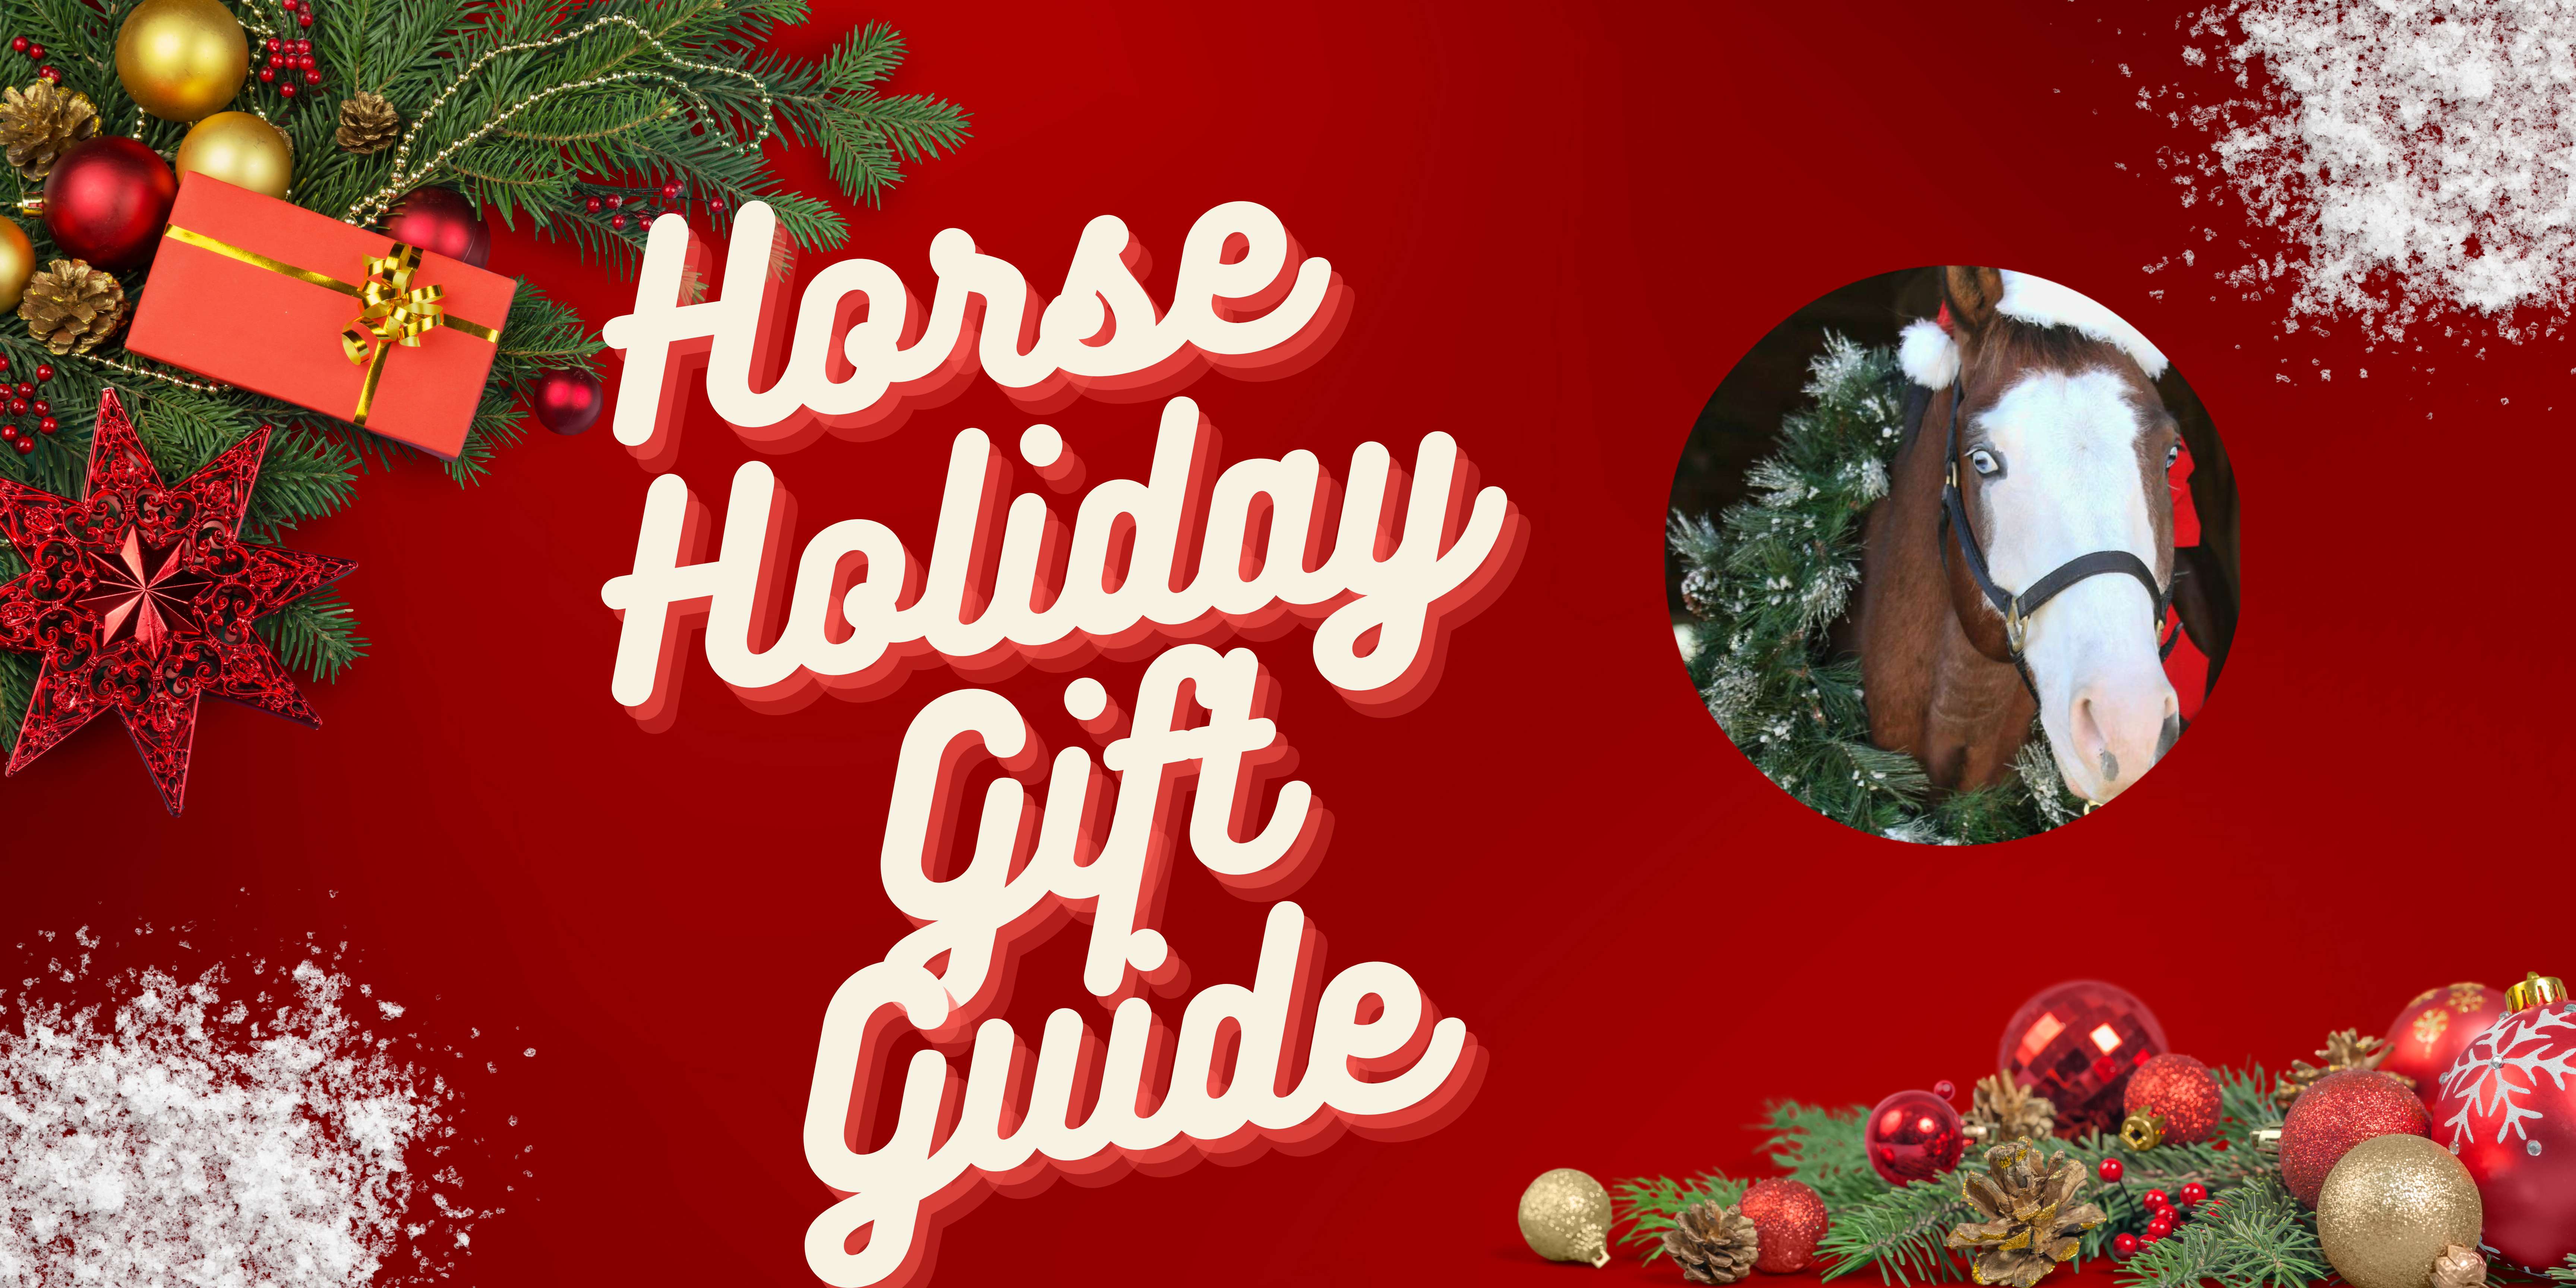 banners says horse holiday gift guide